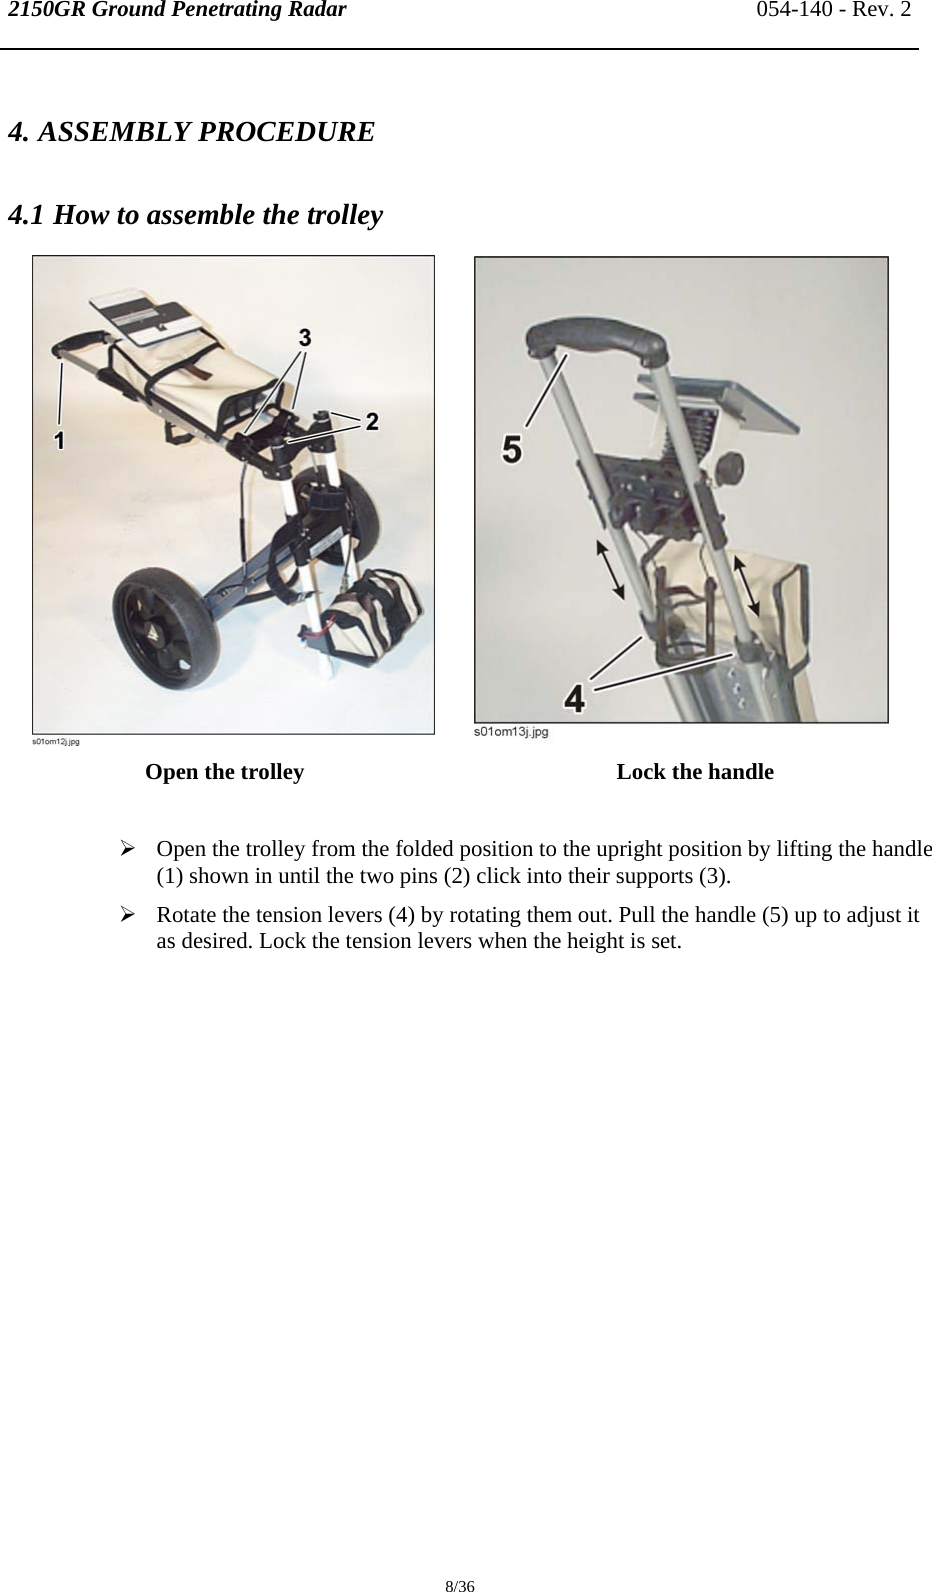 2150GR Ground Penetrating Radar 054-140 - Rev. 2  8/36 4. ASSEMBLY PROCEDURE 4.1 How to assemble the trolley          Open the trolley  Lock the handle  ¾ Open the trolley from the folded position to the upright position by lifting the handle (1) shown in until the two pins (2) click into their supports (3). ¾ Rotate the tension levers (4) by rotating them out. Pull the handle (5) up to adjust it as desired. Lock the tension levers when the height is set.  